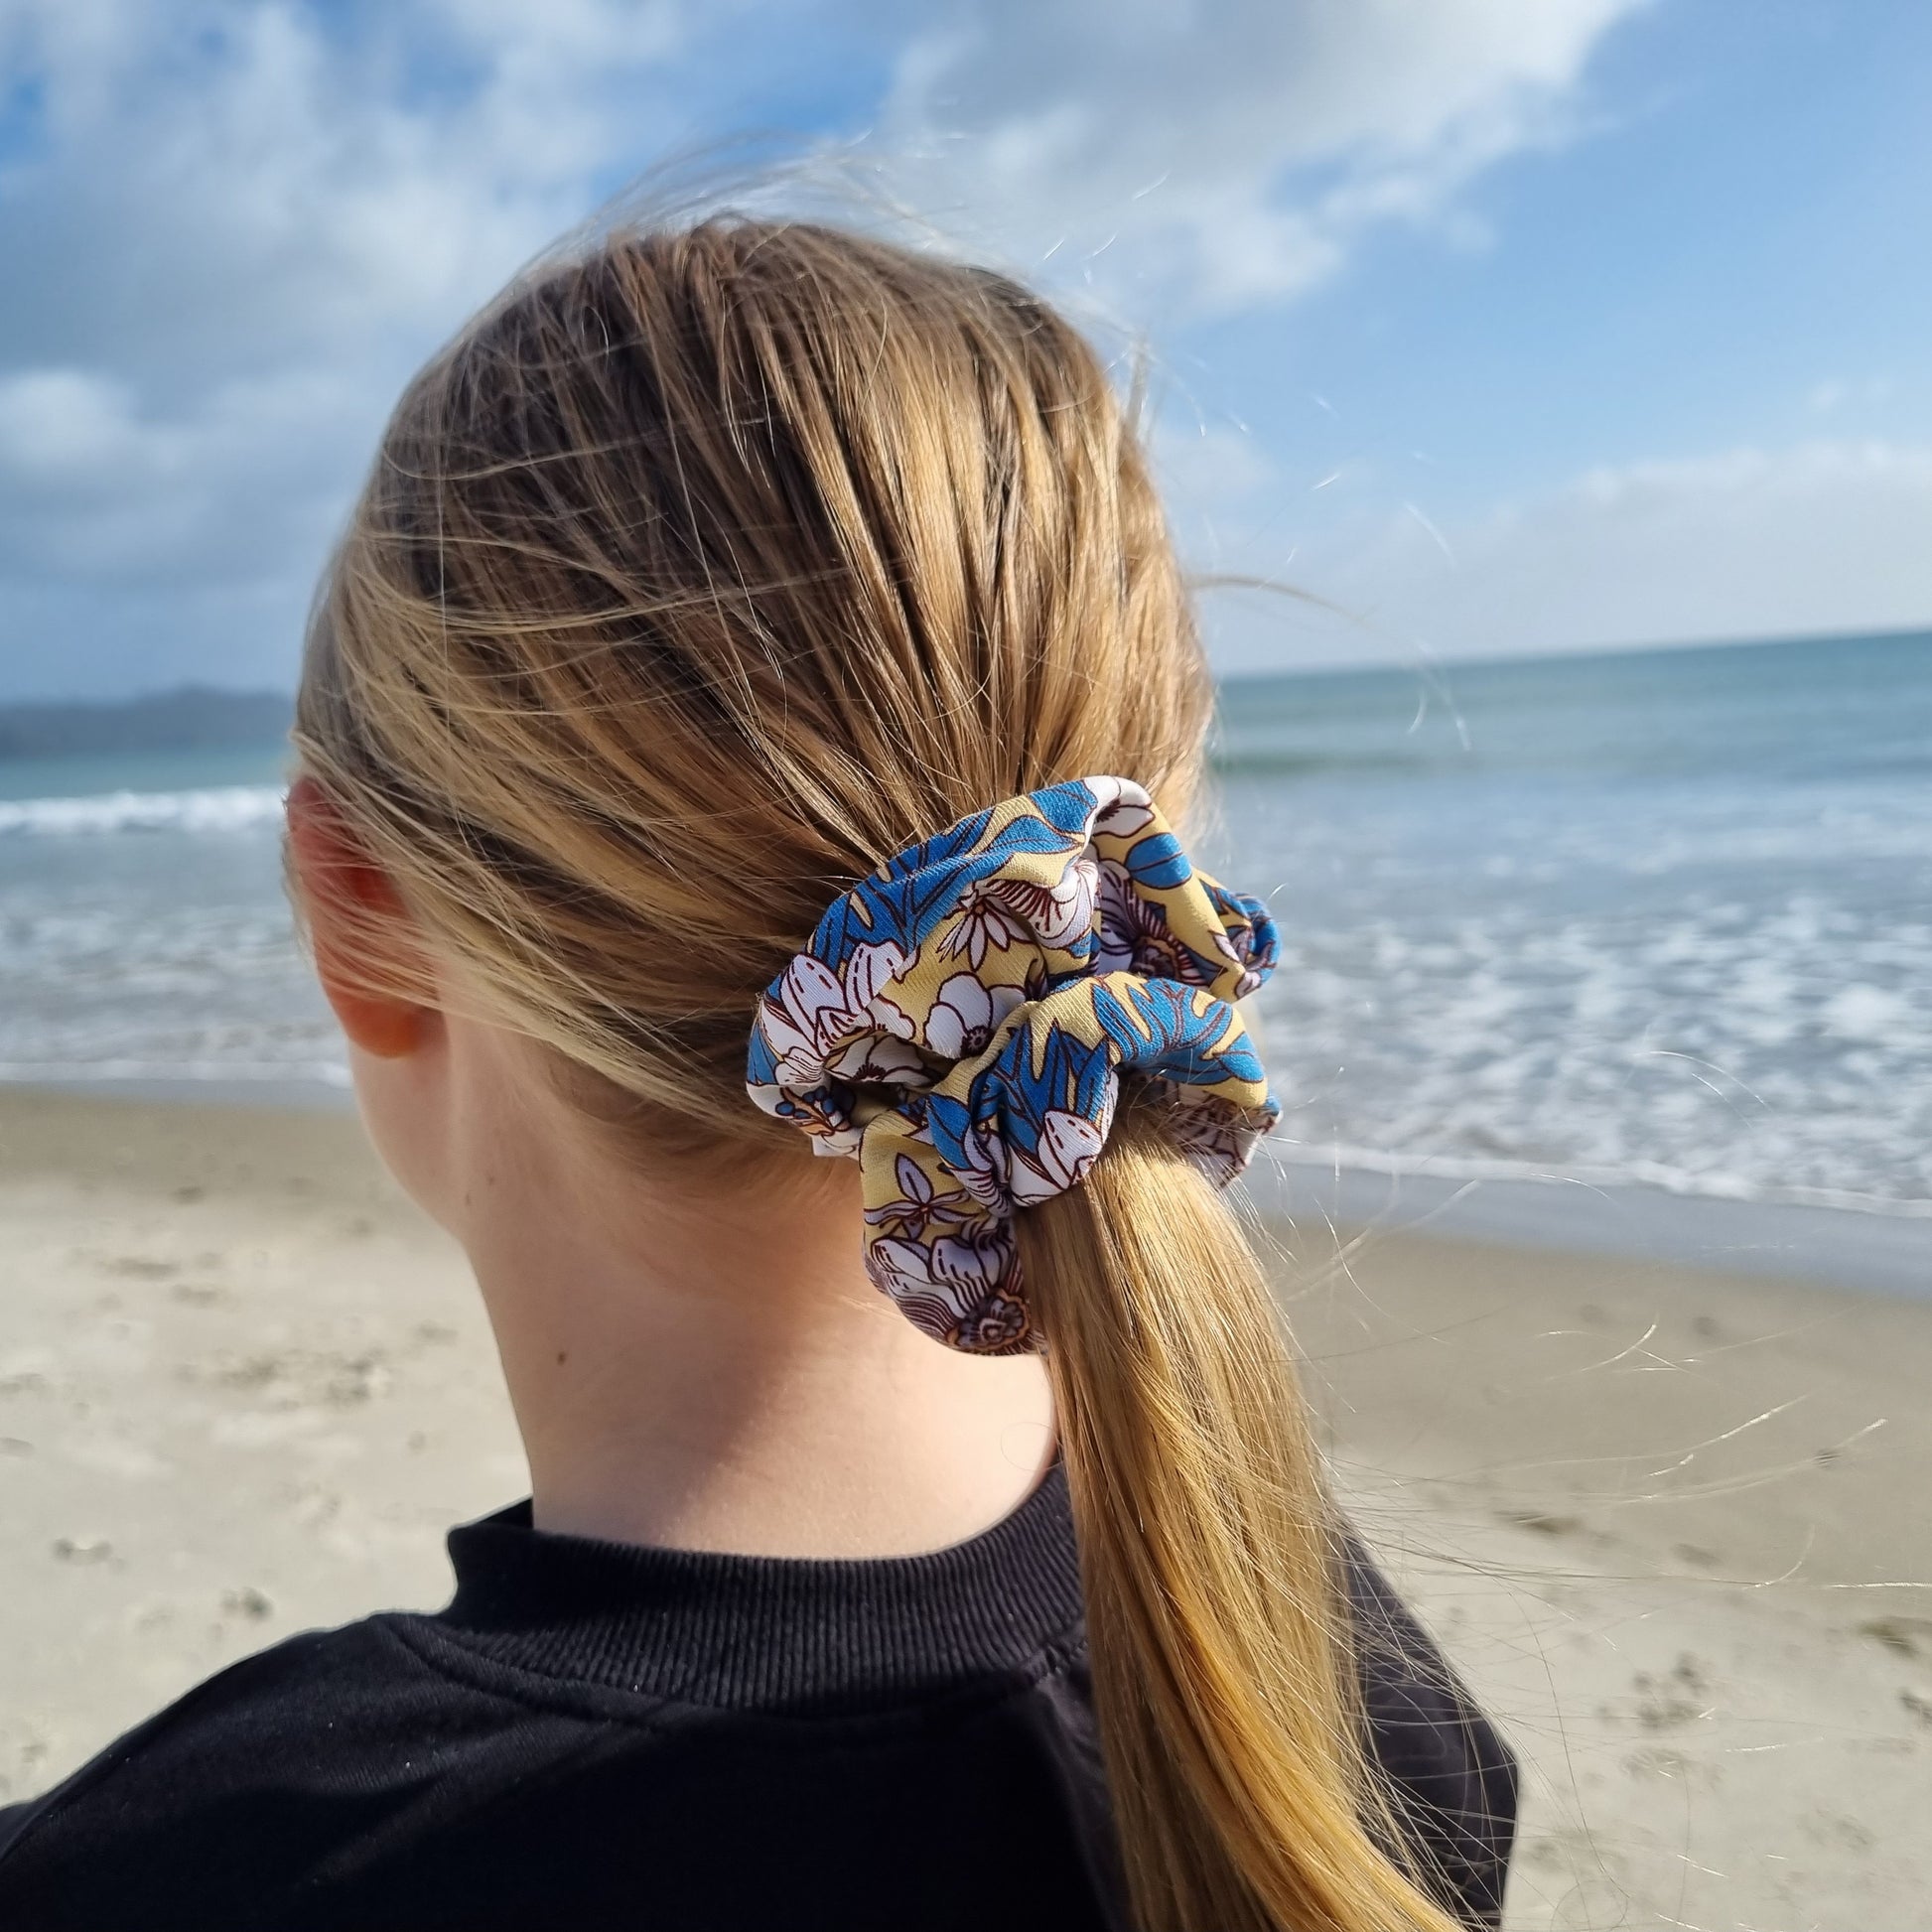 Scrunchie - April tied in girls hair at the beach. Blue and white flowers on yellow background.